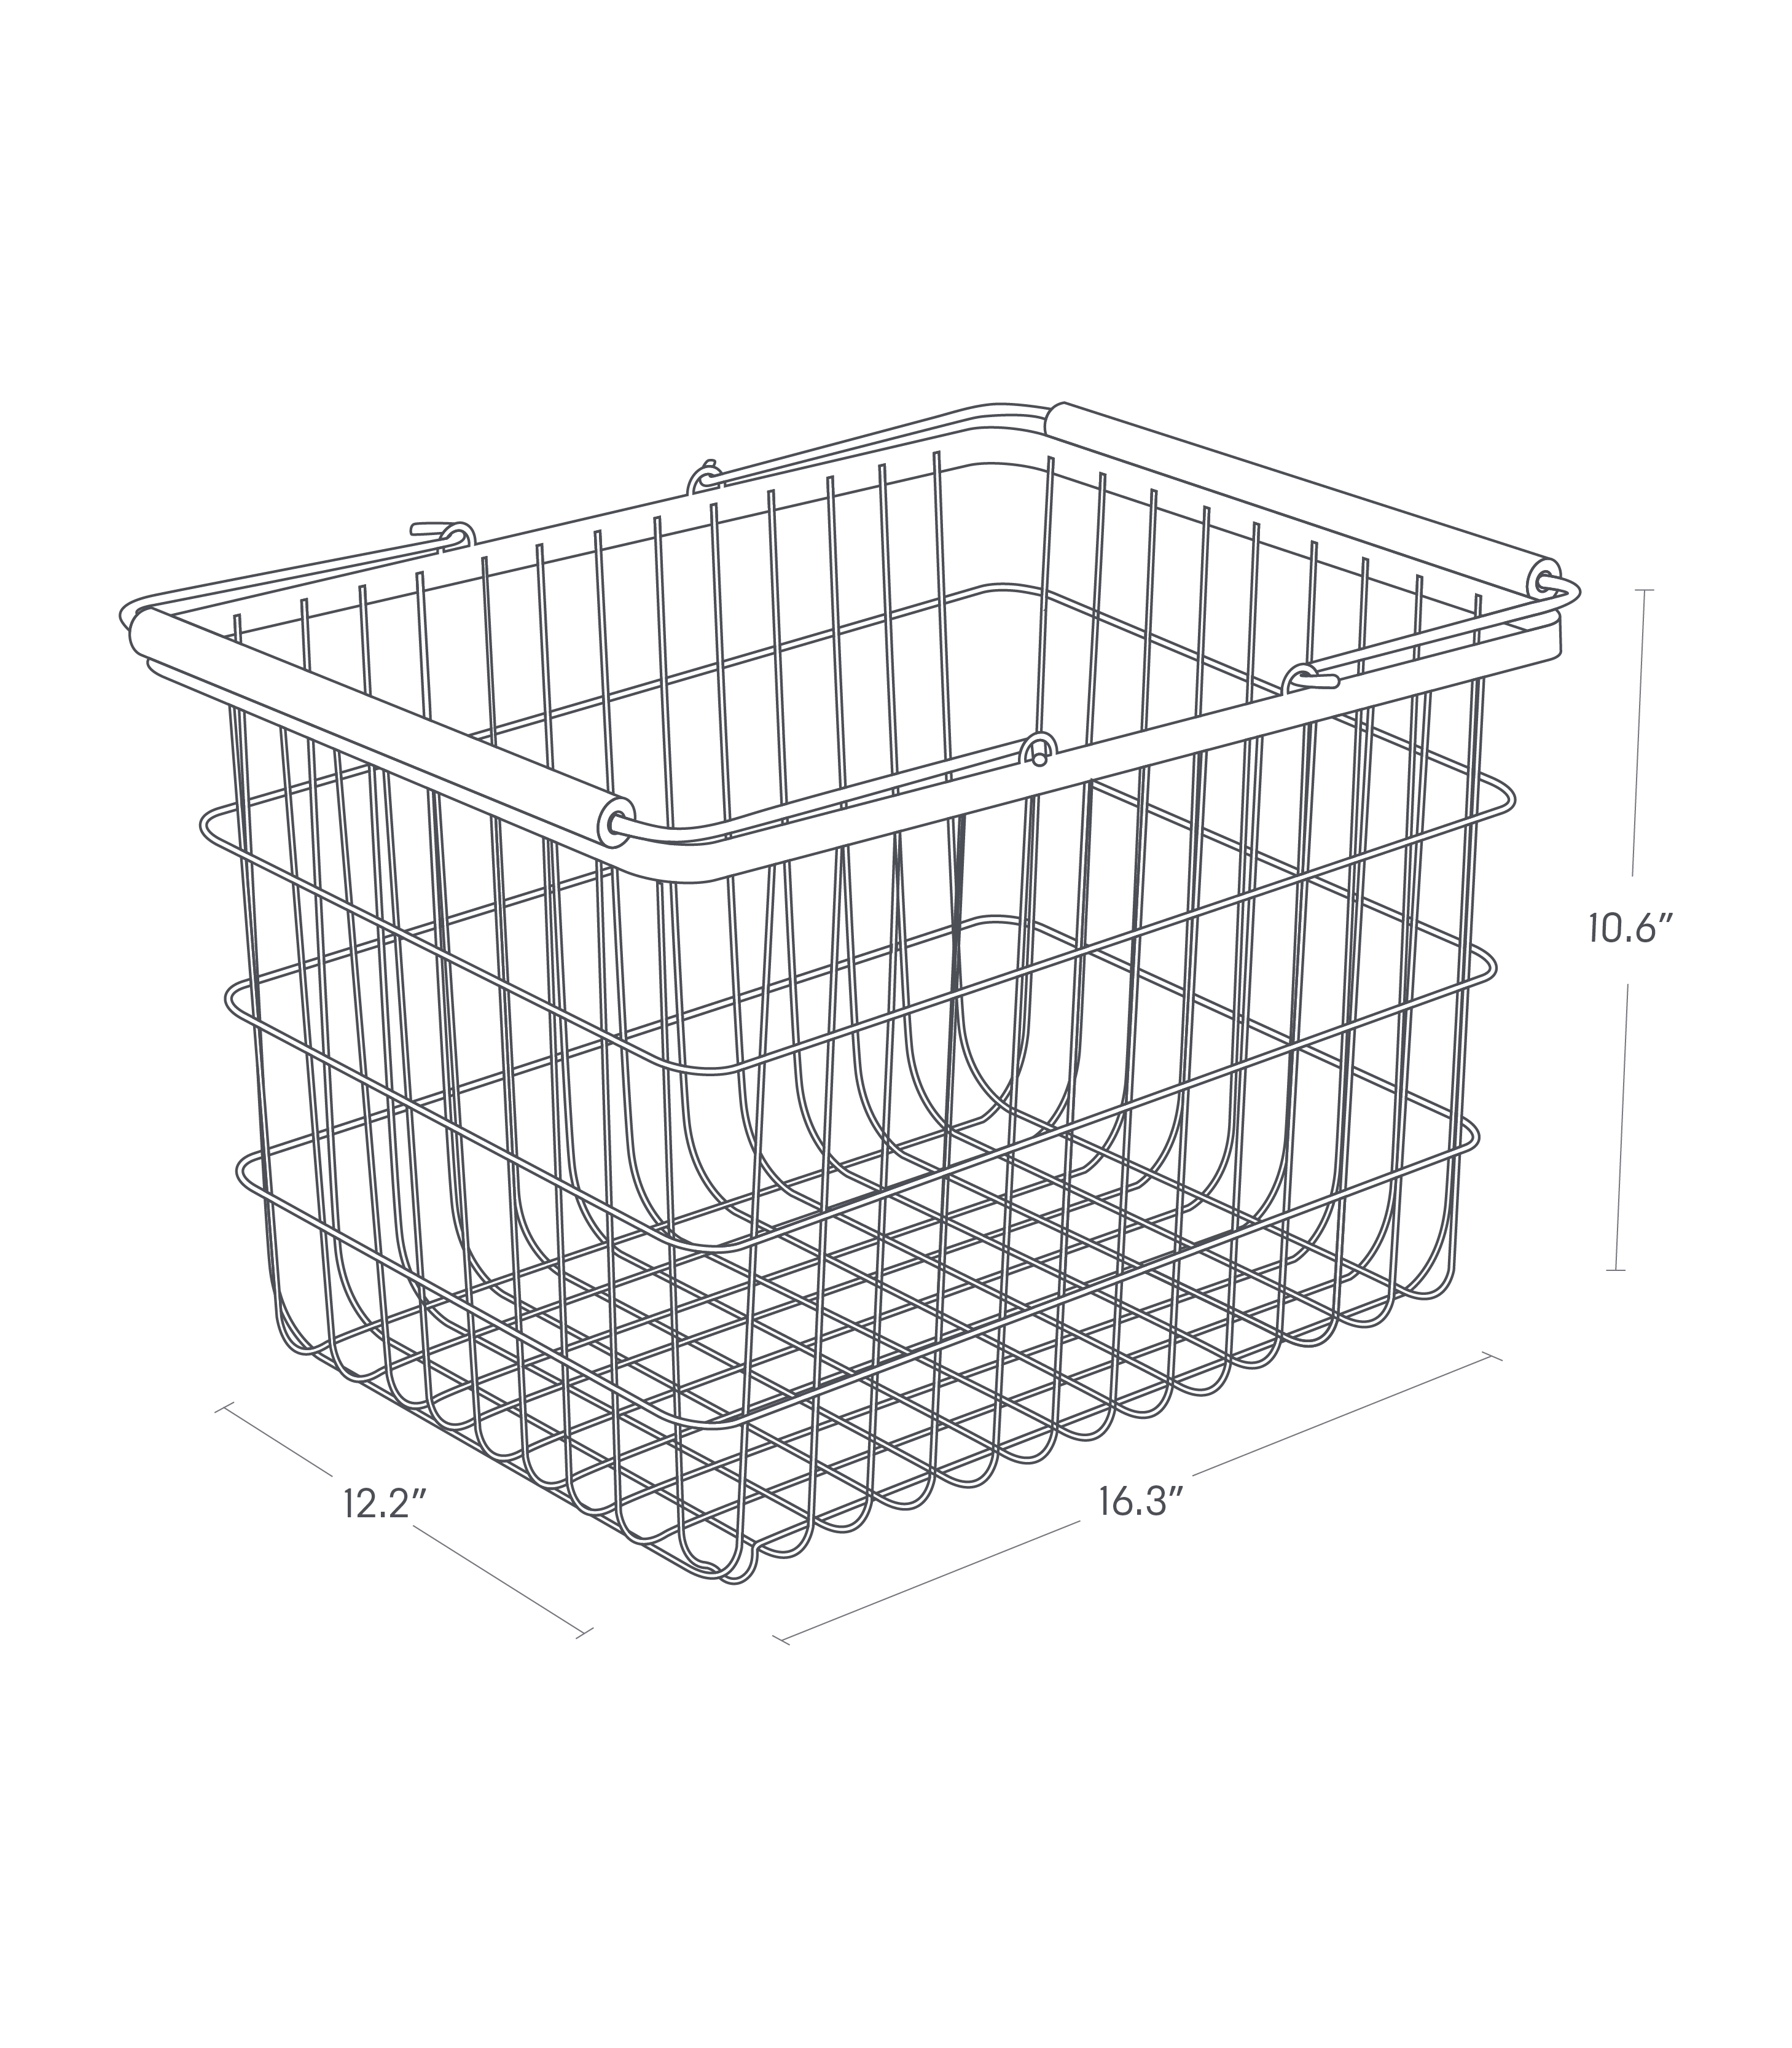 Dimension image for Wire Basket - Two Sizes on a white background including dimensions  L 12.2 x W 16.34 x H 10.63 inches